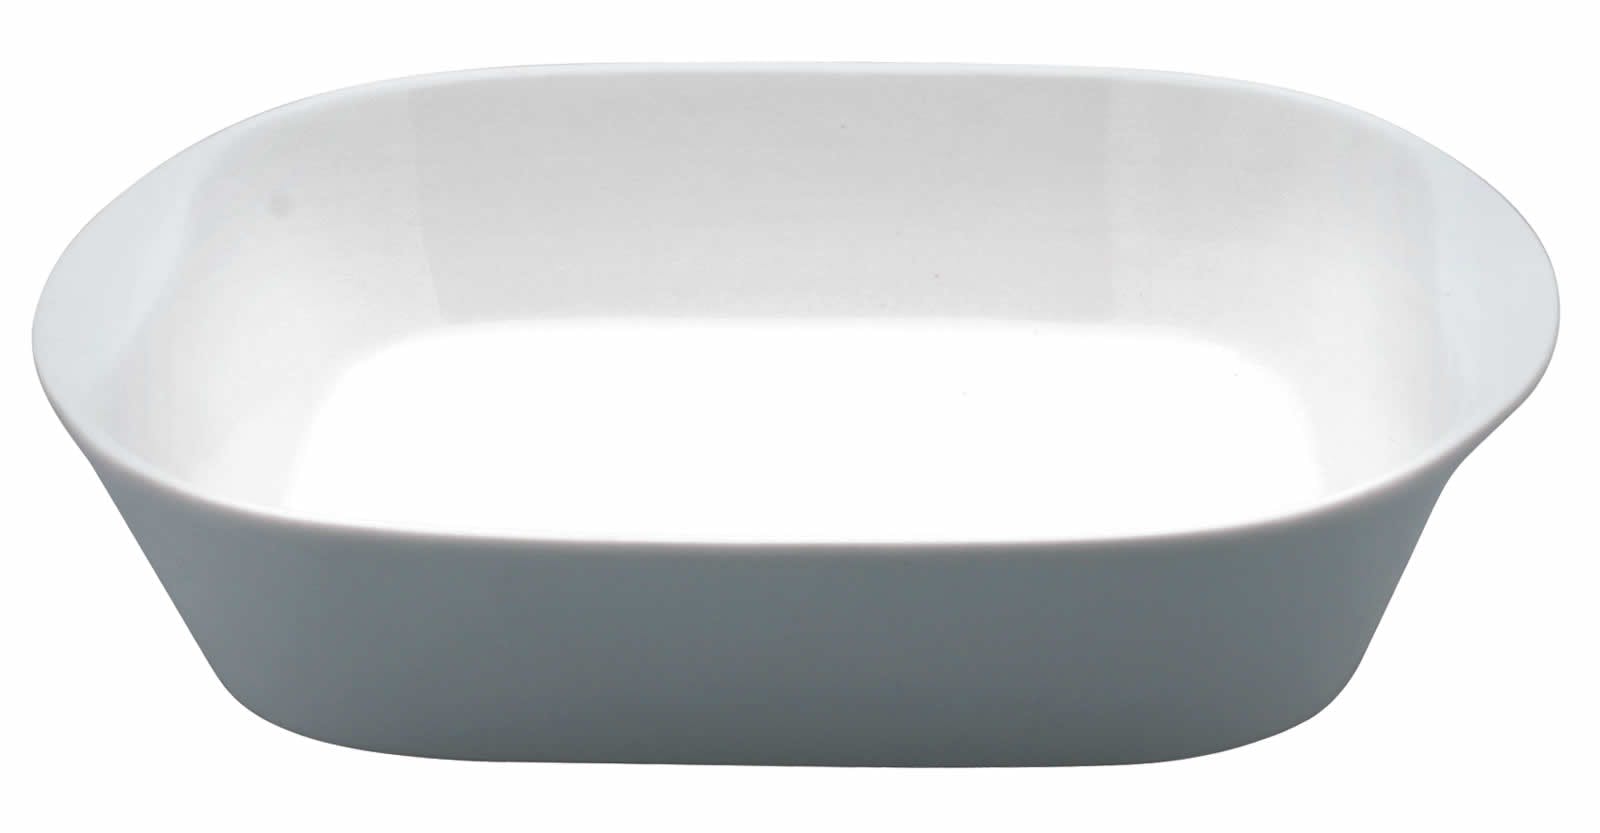 KitchenCraft White Porcelain Serving Dish - The Cooks Cupboard Ltd